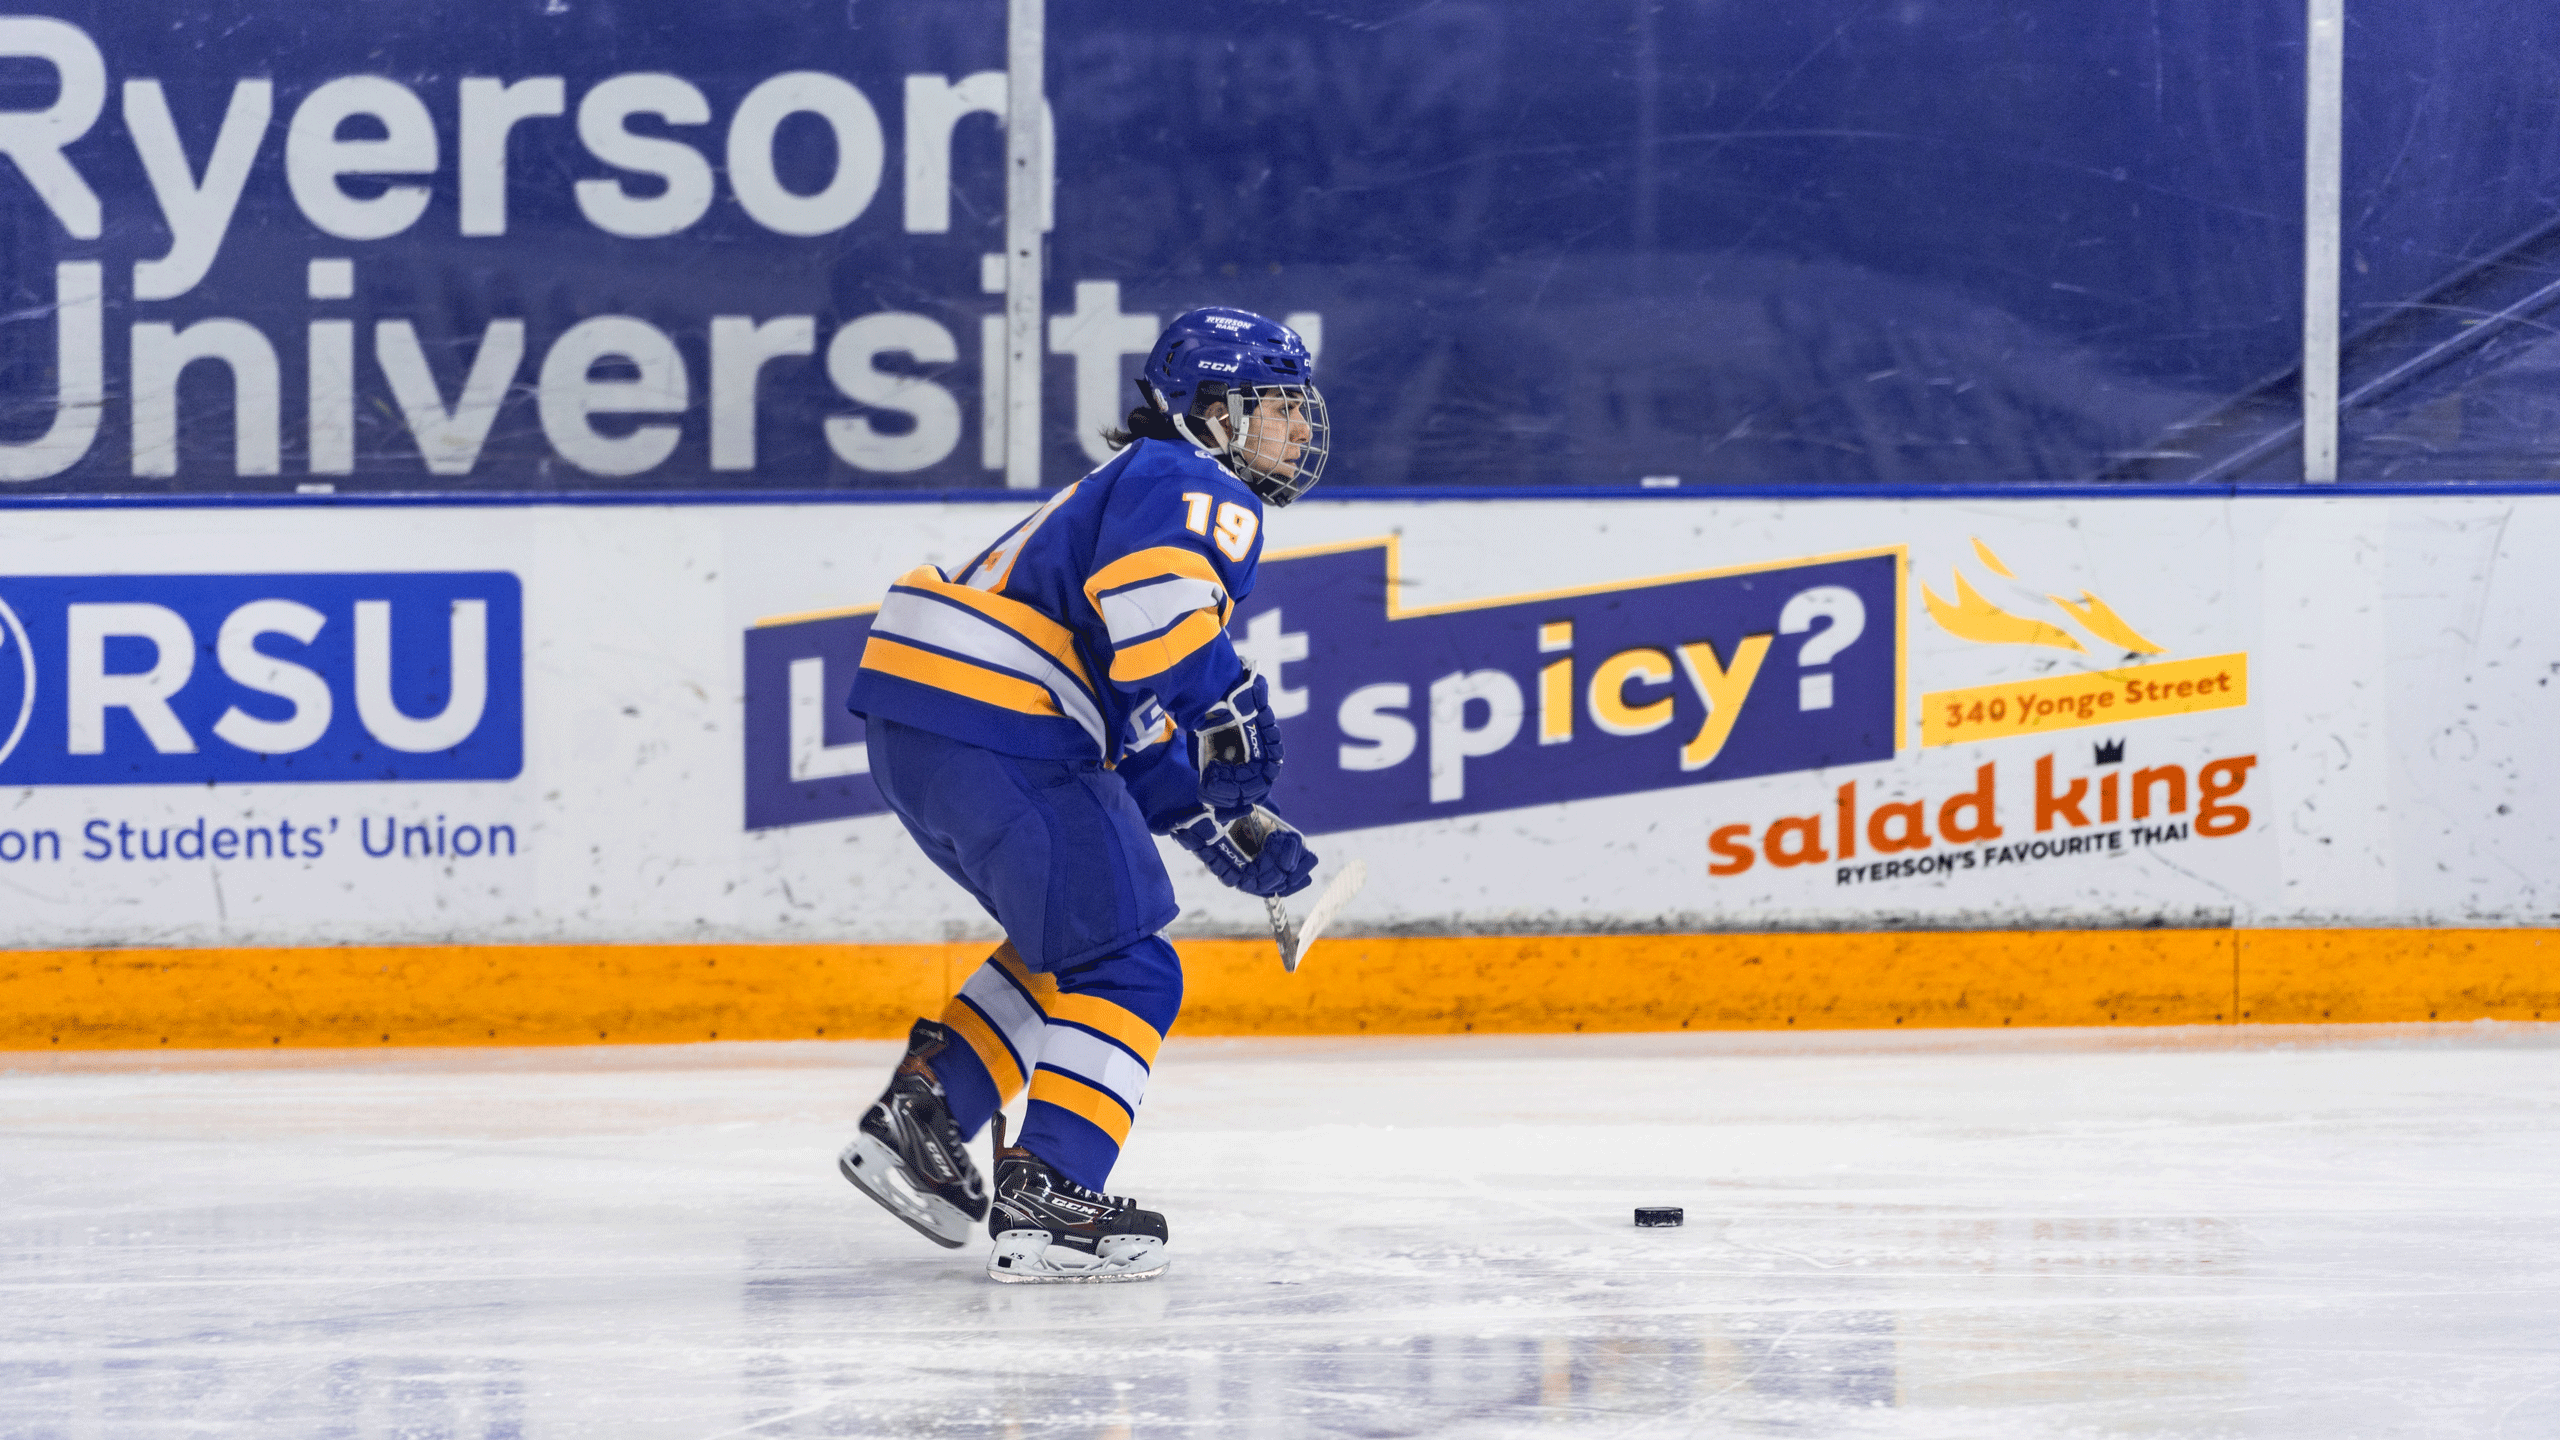 A Rams women's hockey player in a blue jersey surveys the ice